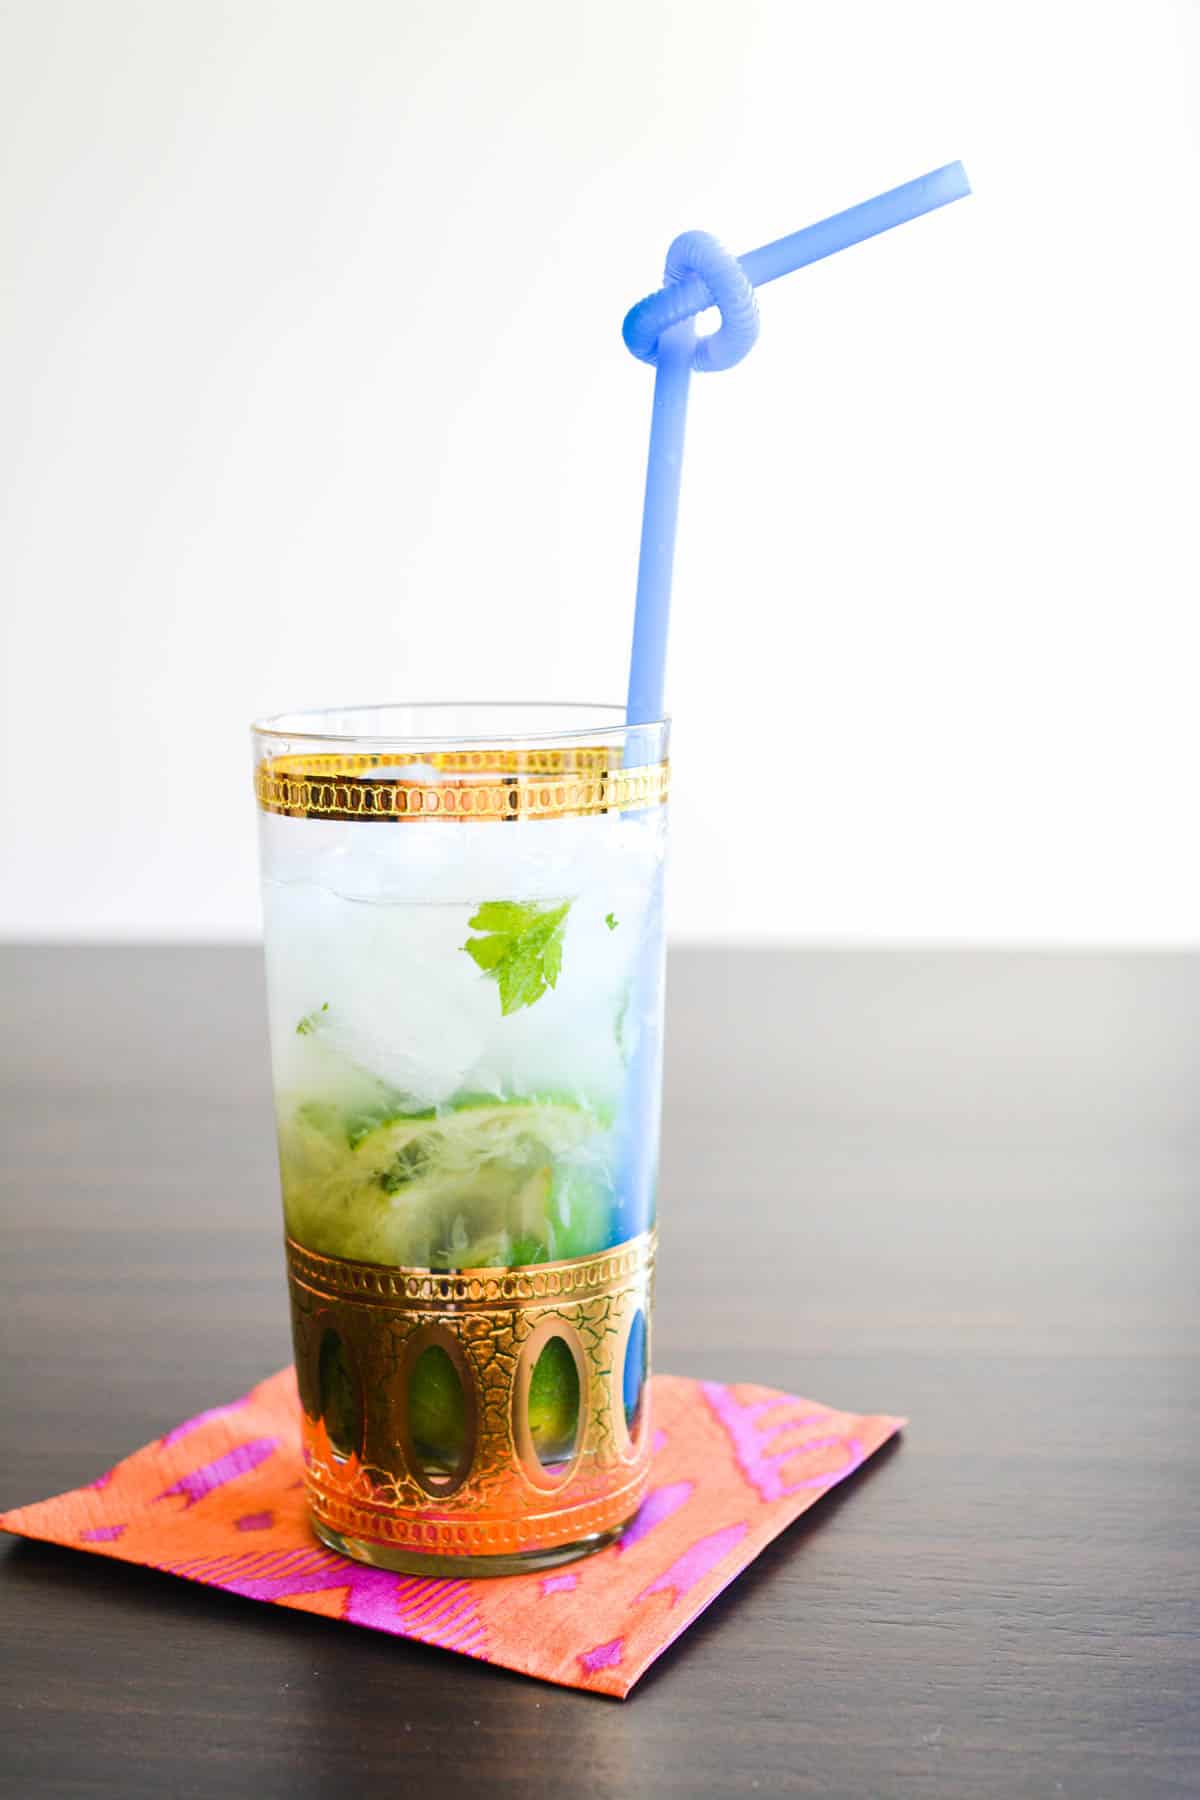 A cocktail glass holding a tequila mojito on a napkin on a table with mint and lime in a clear liquid with blue bendy straw.